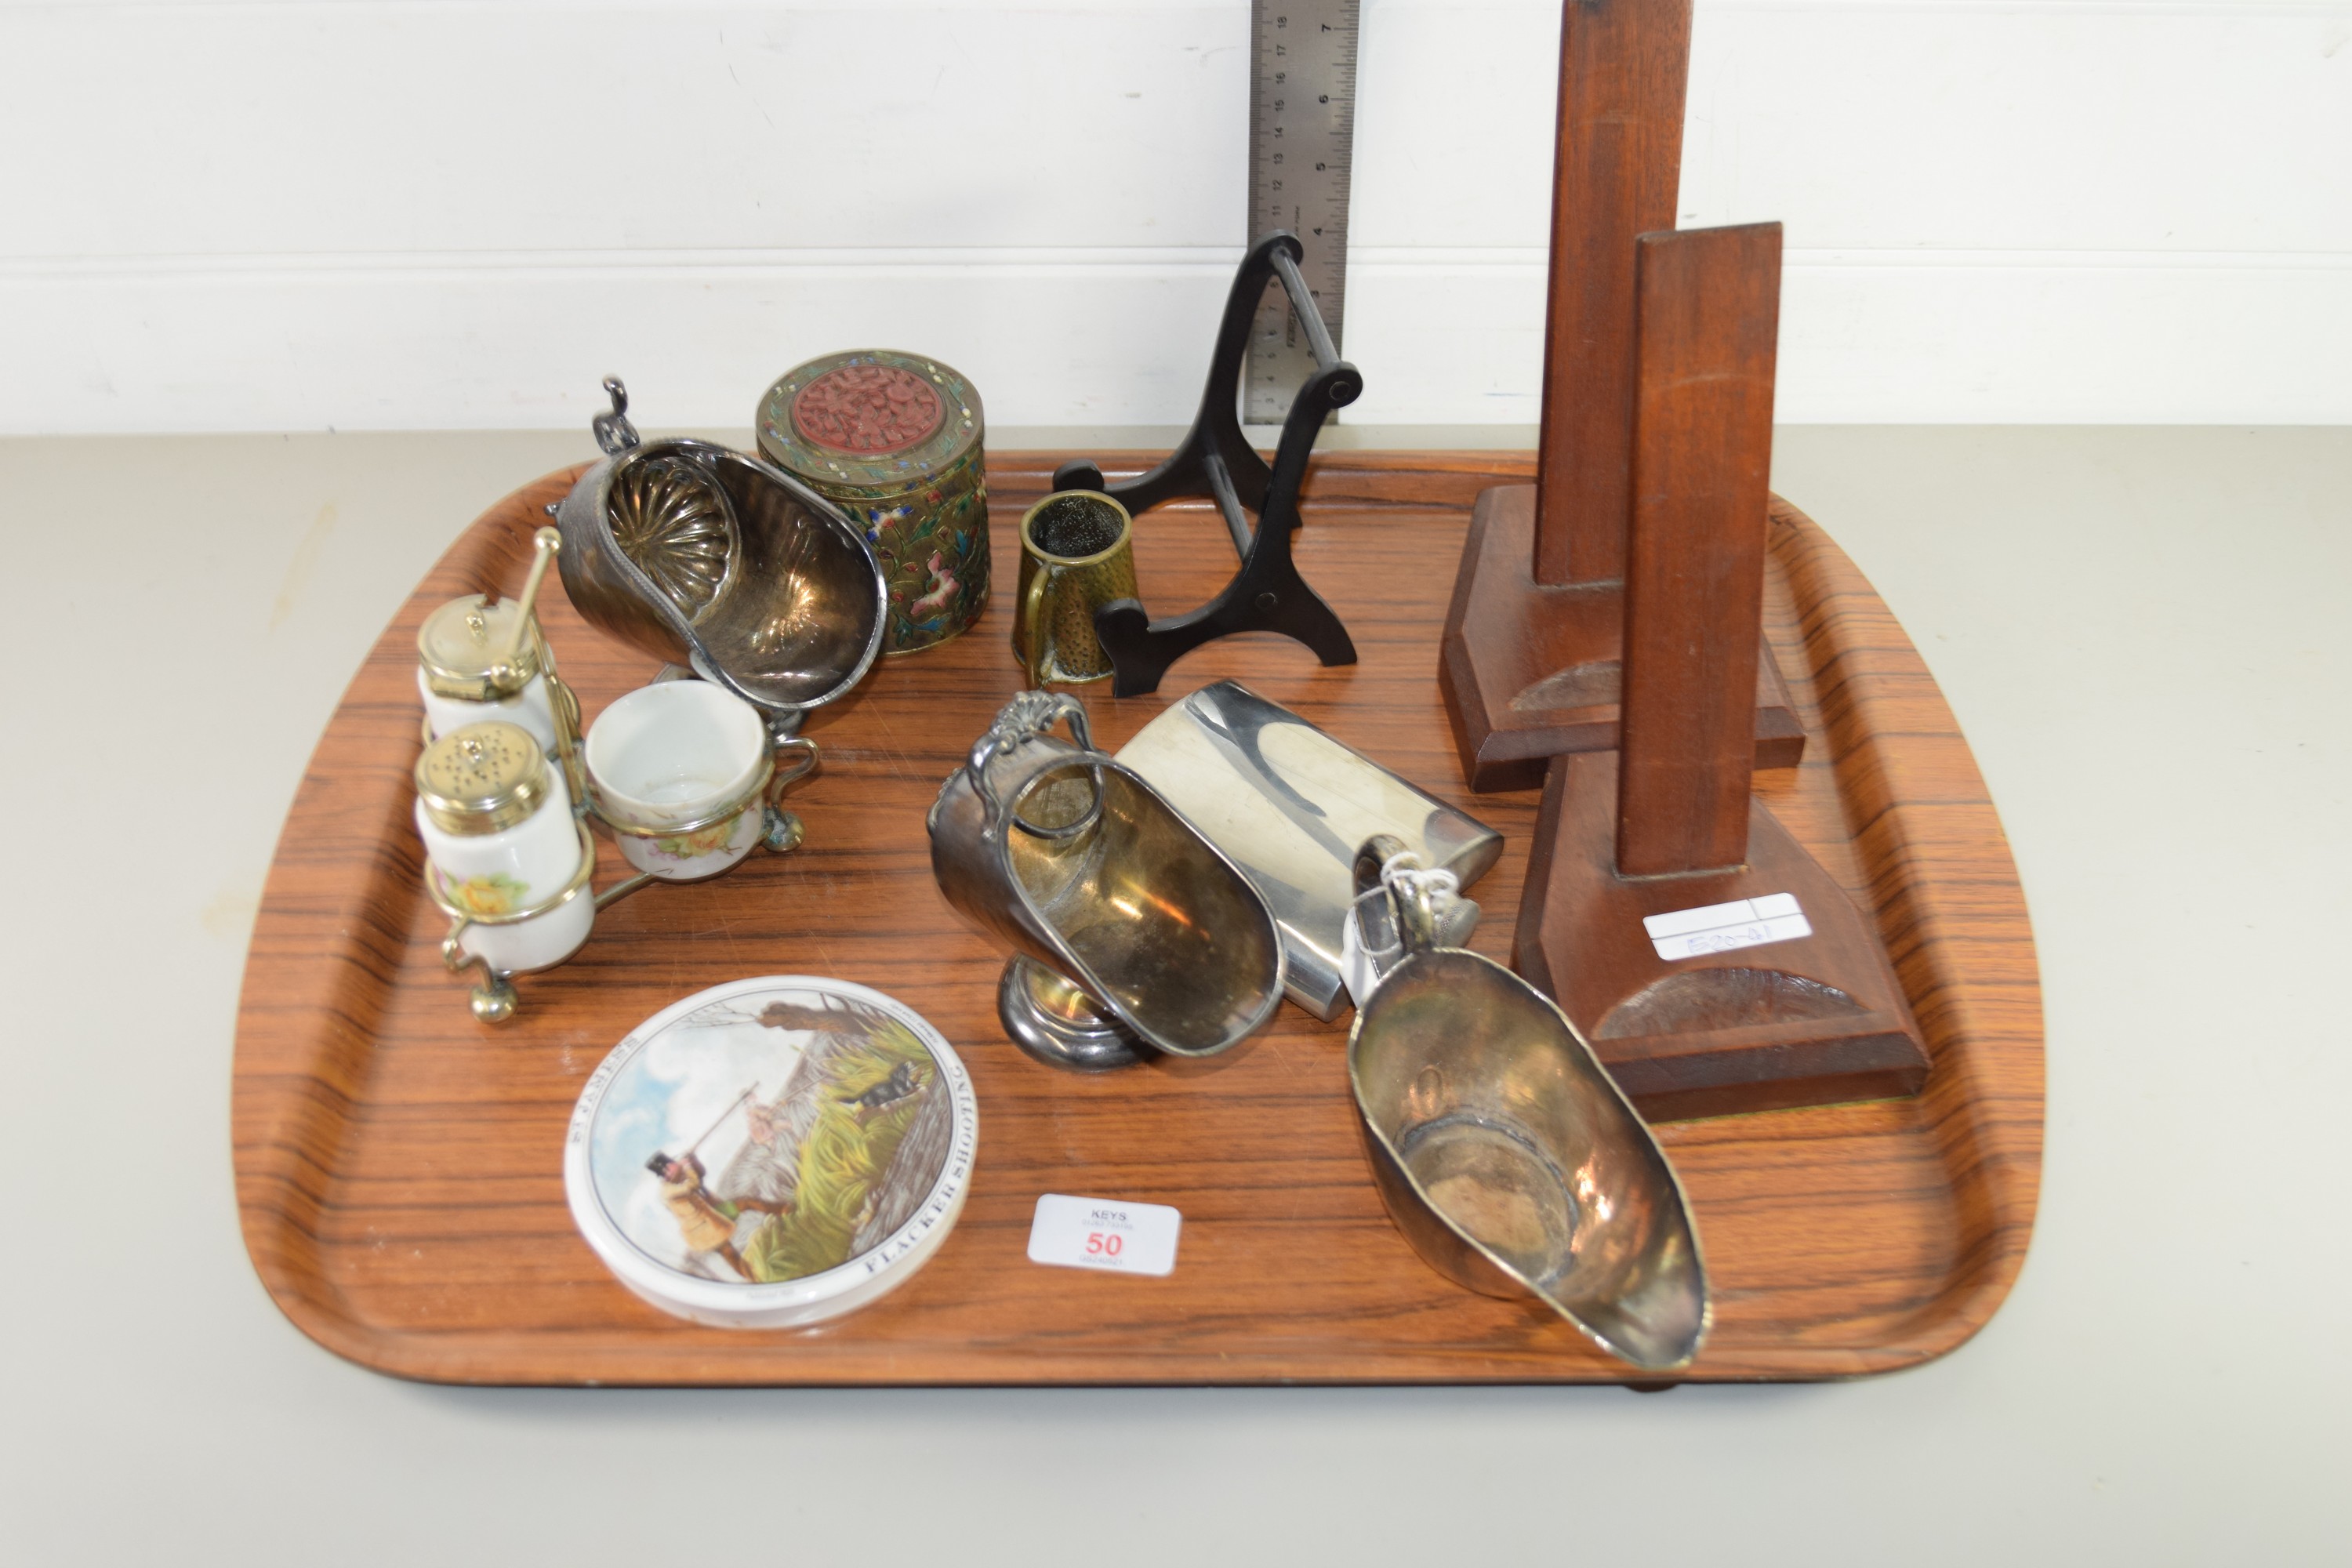 TRAY CONTAINING SILVER METAL ITEMS, PLATED SAUCE BOAT, POT LID - Image 2 of 2